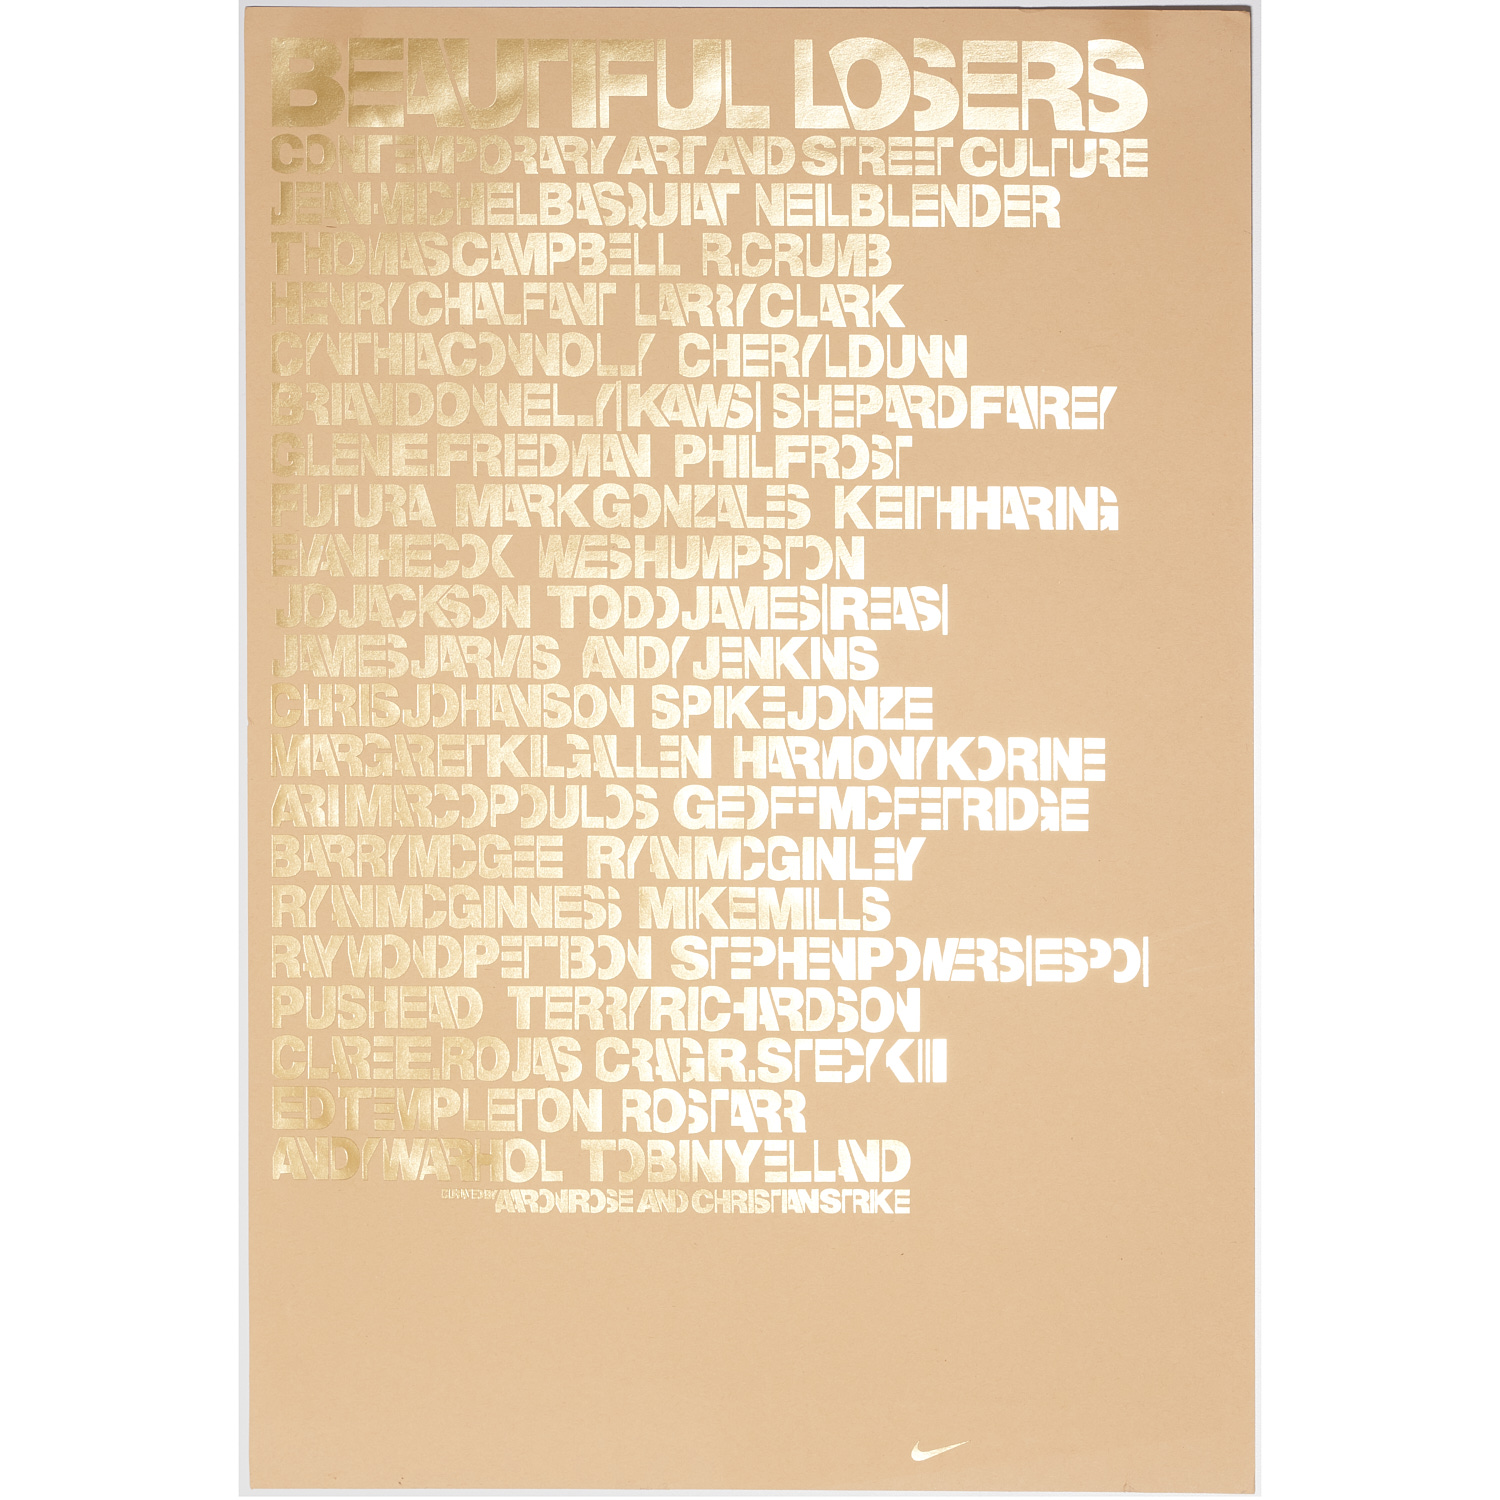 Beautiful Losers, exhibition poster | Millea Brothers